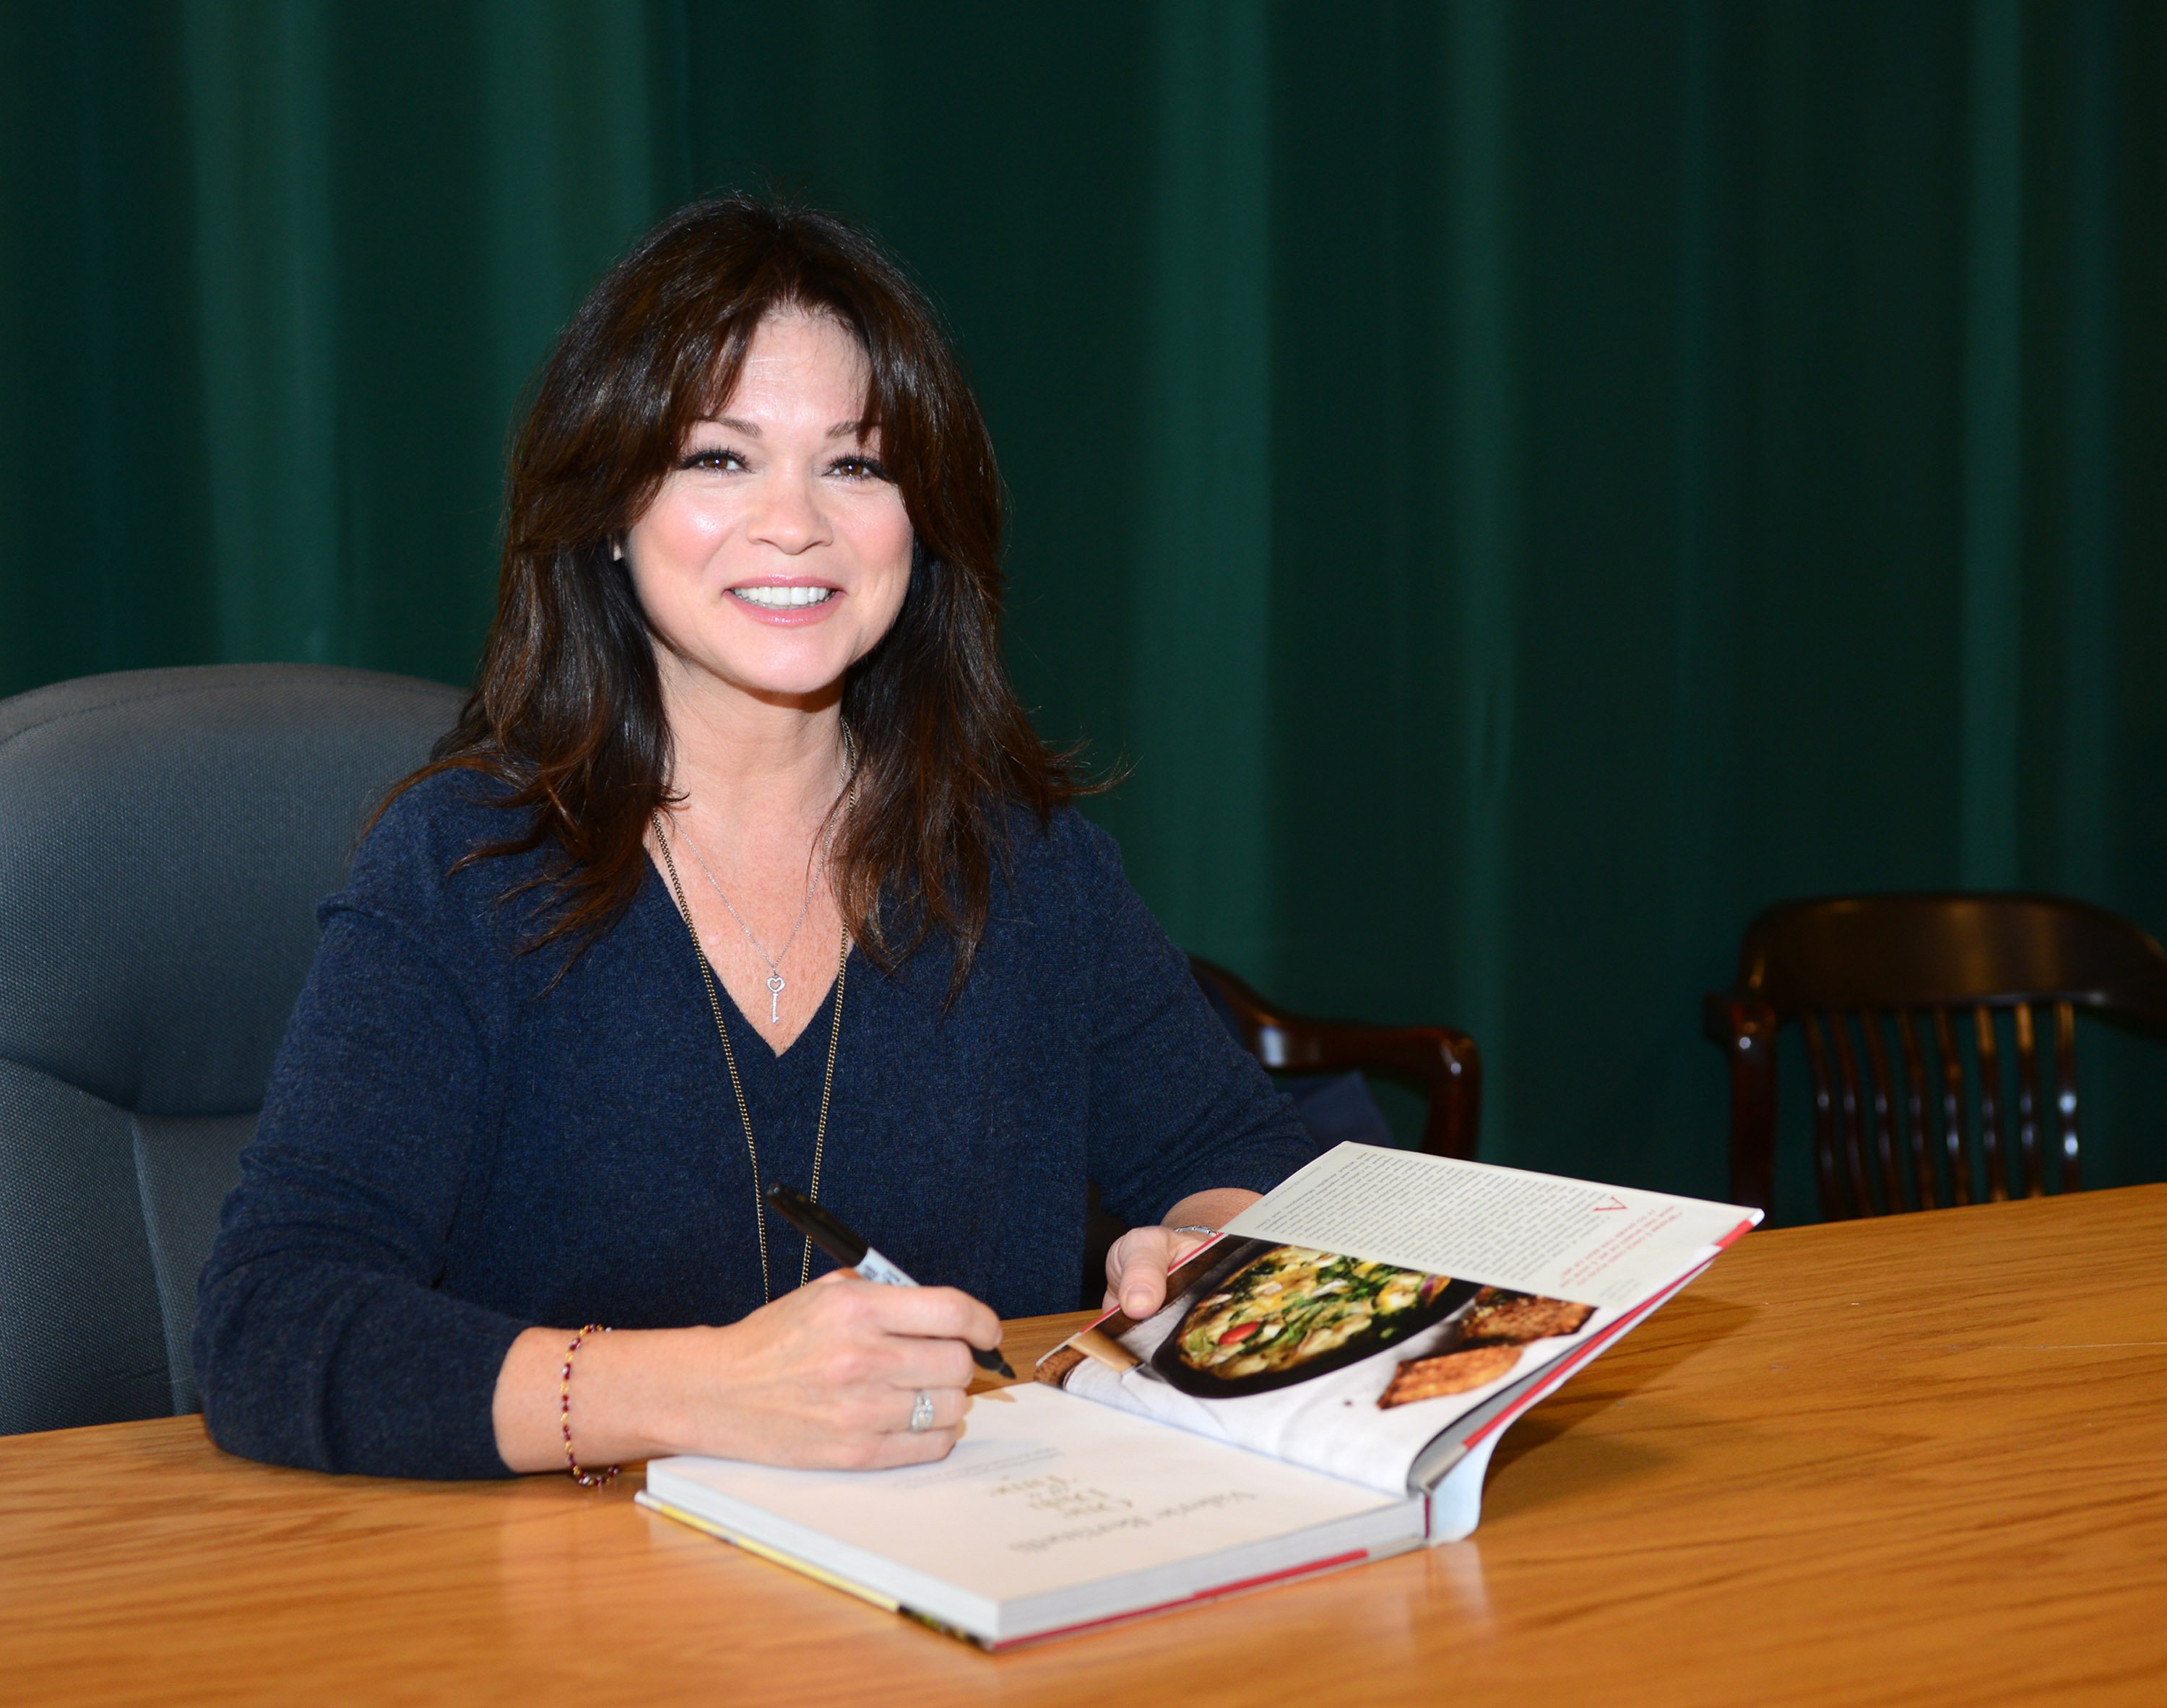 Food Network star Valerie Bertinelli smiles as she signs a copy of her cookbook